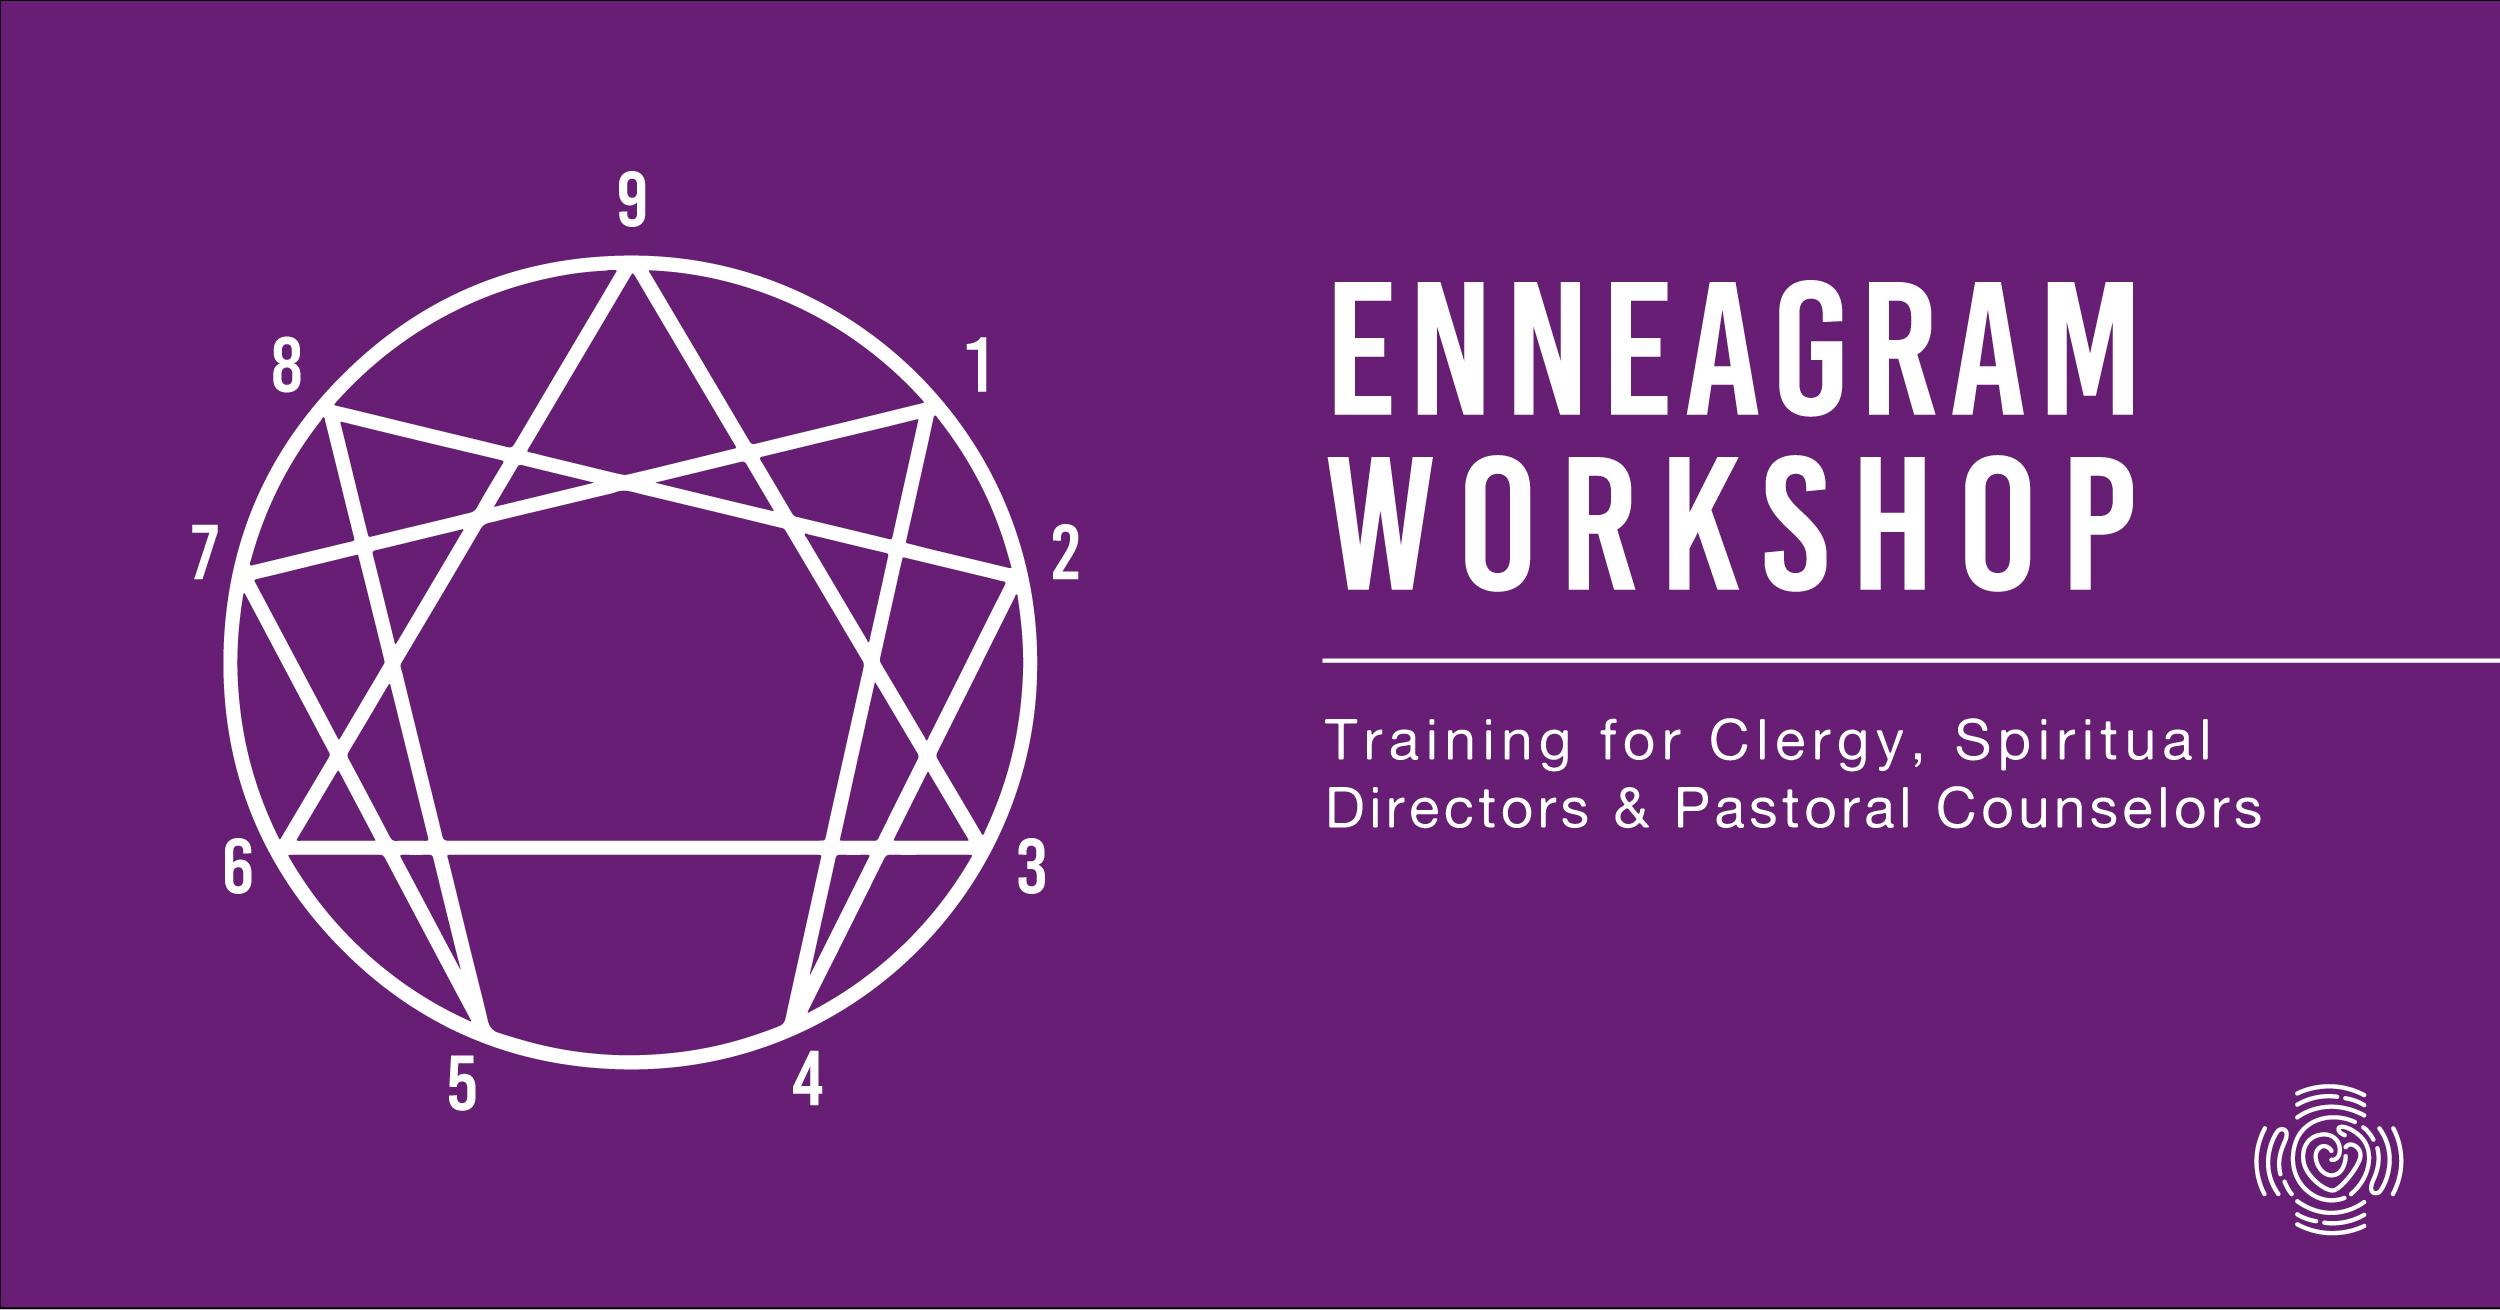 Enneagram Training for Clergy, Spiritual Directors, and Pastoral Counselors